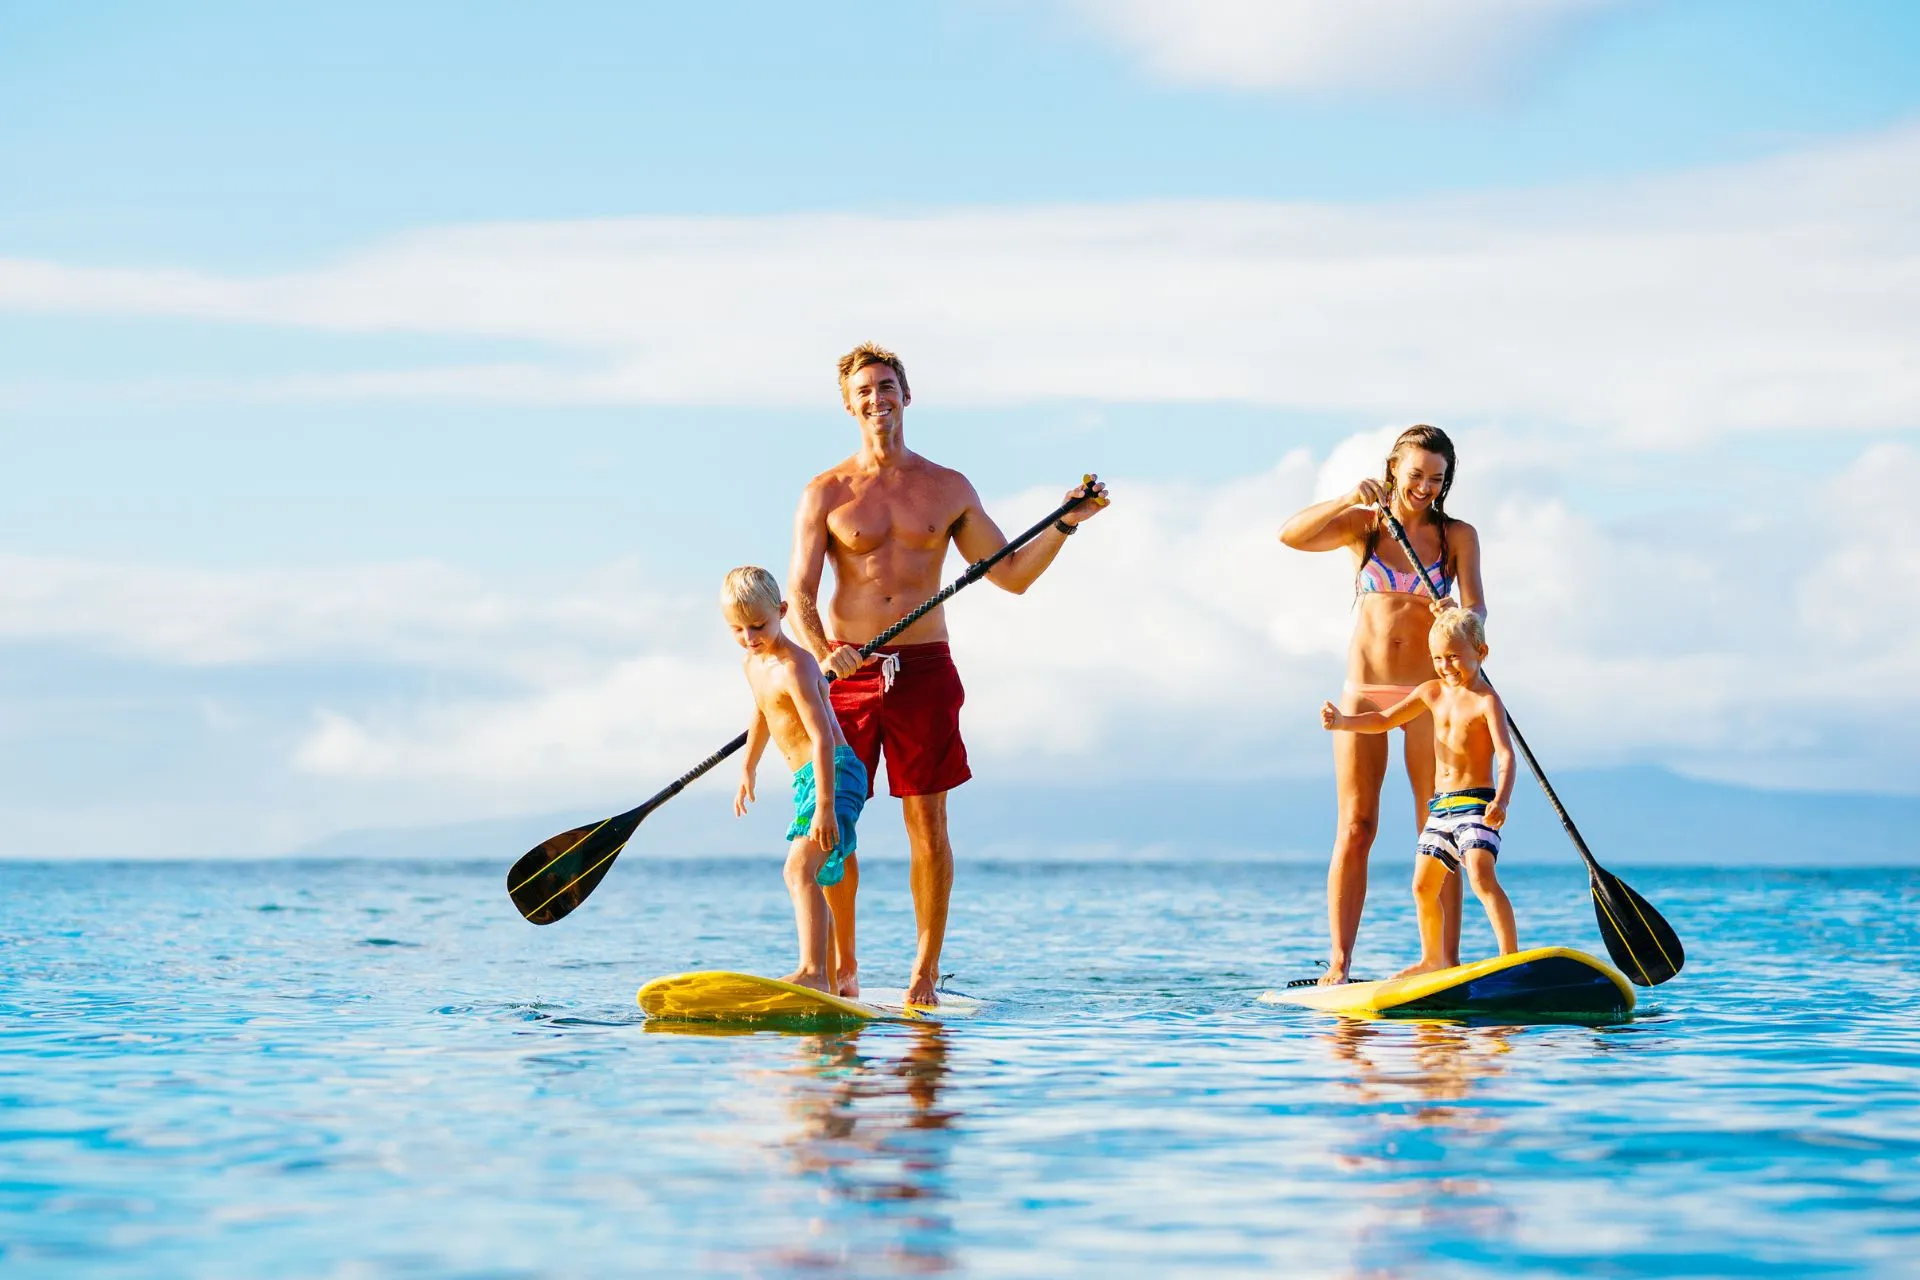 paddle boarding is one of the many things to do in playa blanca for families lanzarote